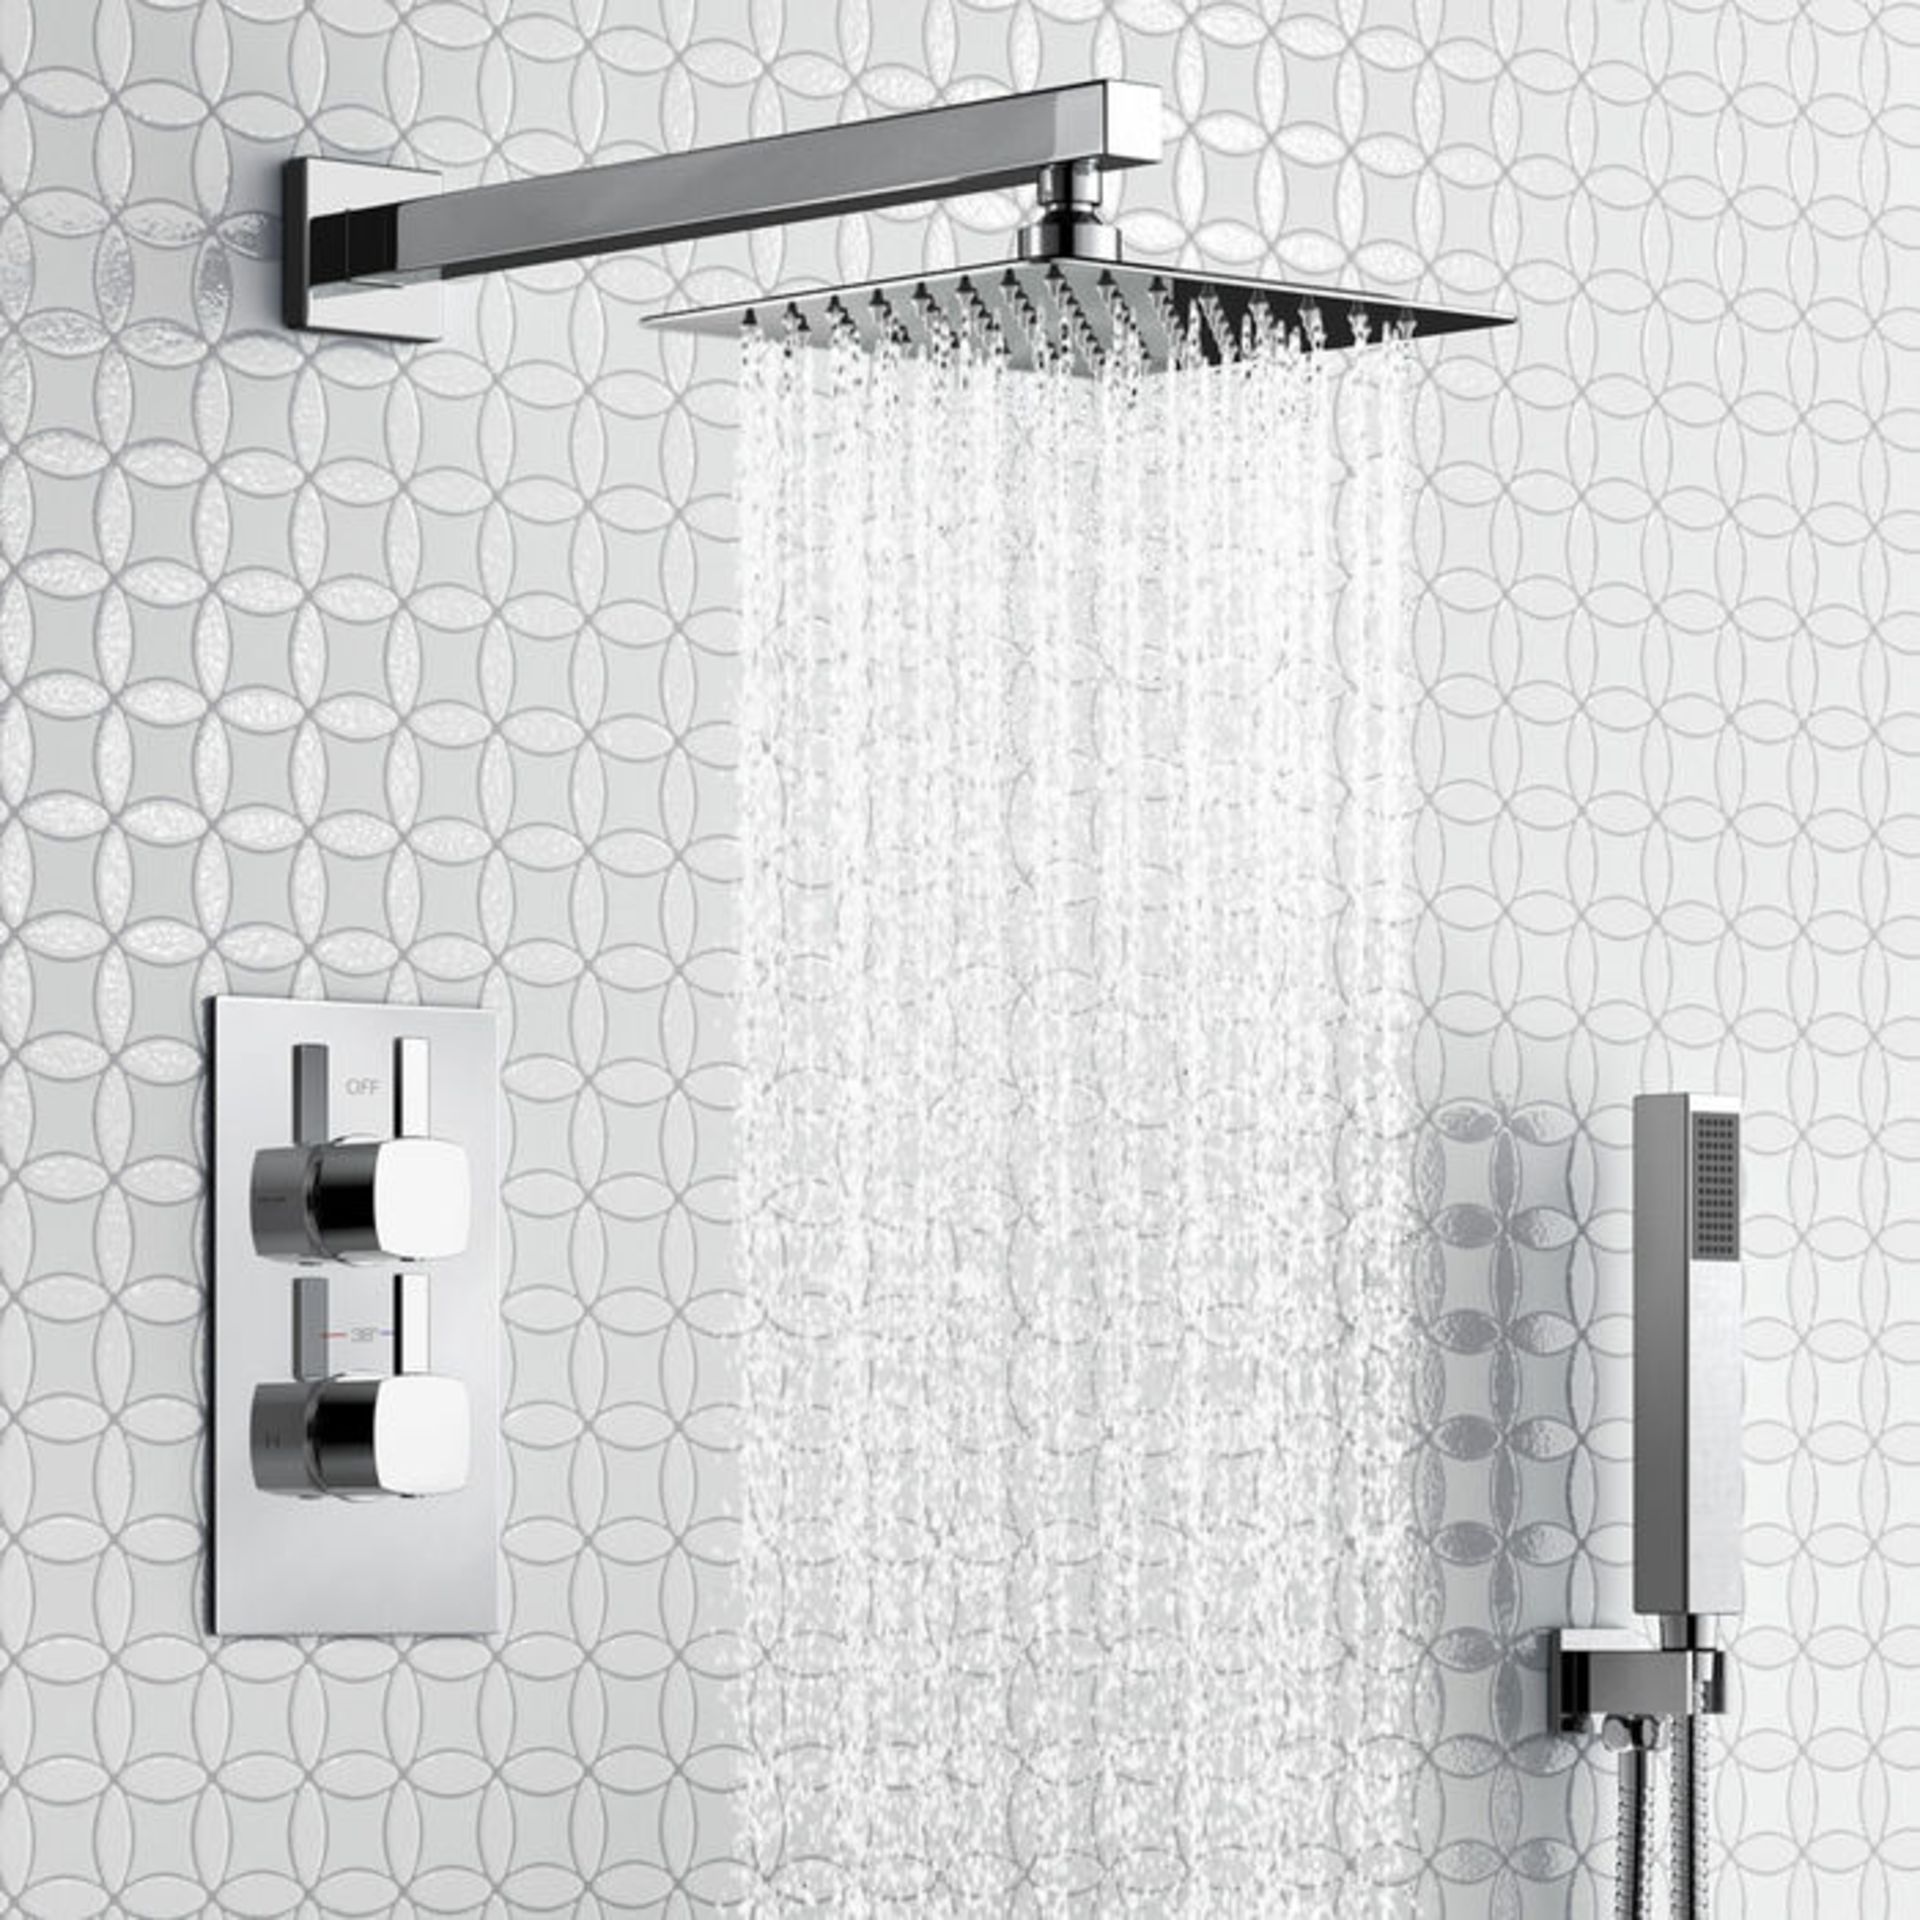 (G55) Square Concealed Thermostatic Mixer Shower Kit & Medium Head. RRP £349.99. Family friendly